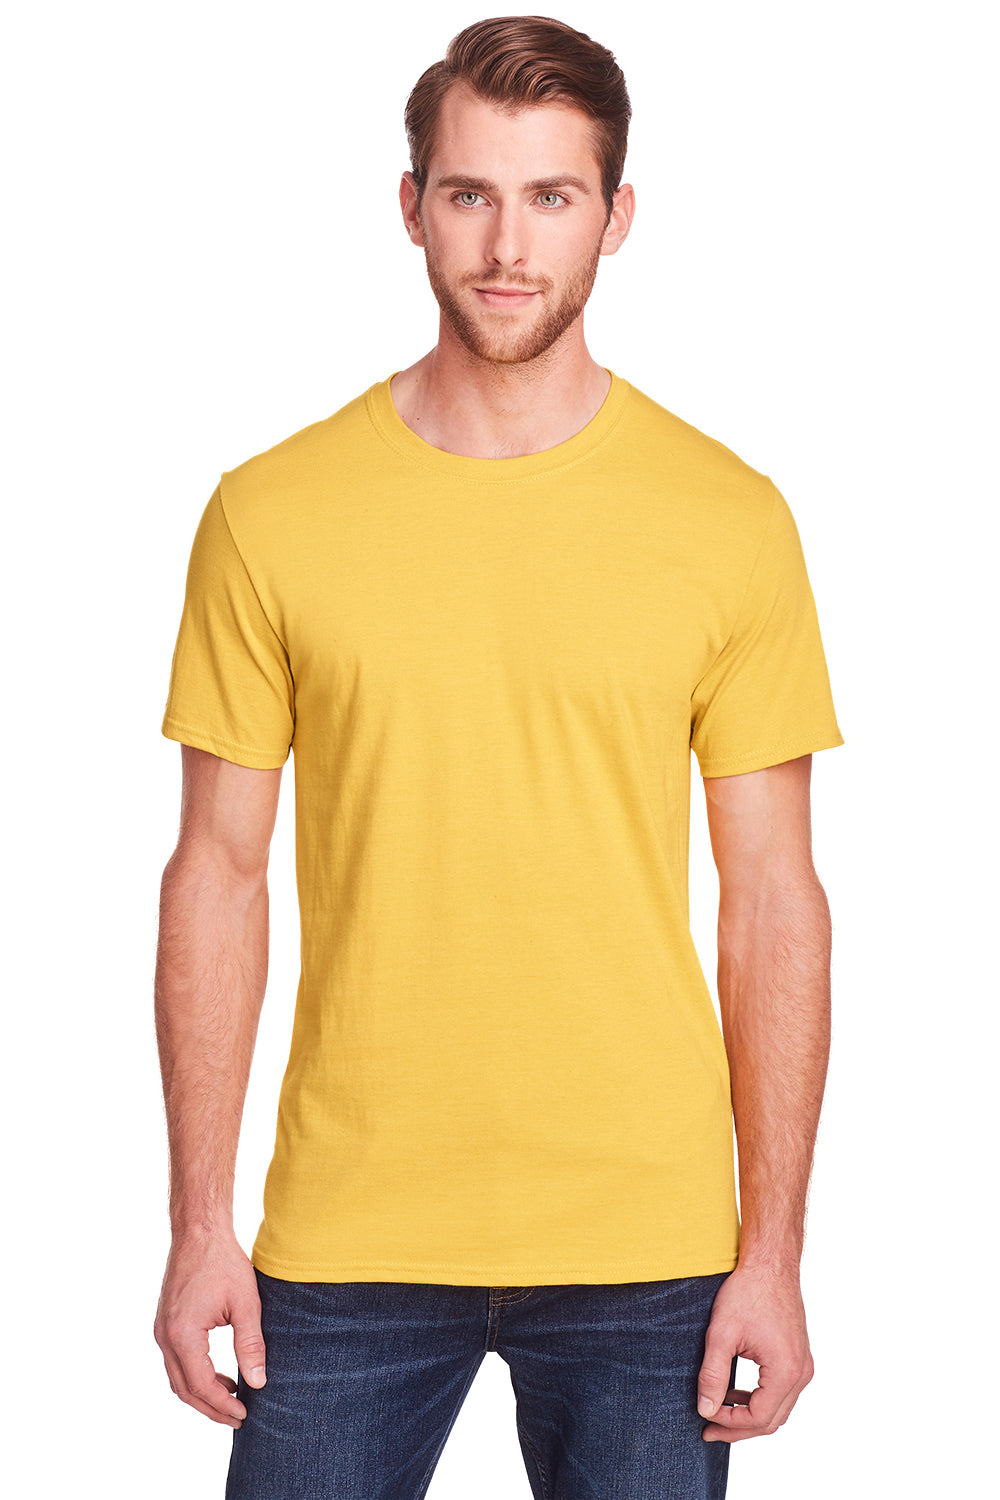 Fruit Of The Loom IC47MR Mens Iconic Short Sleeve Crewneck T-Shirt Heather Mustard Yellow Front